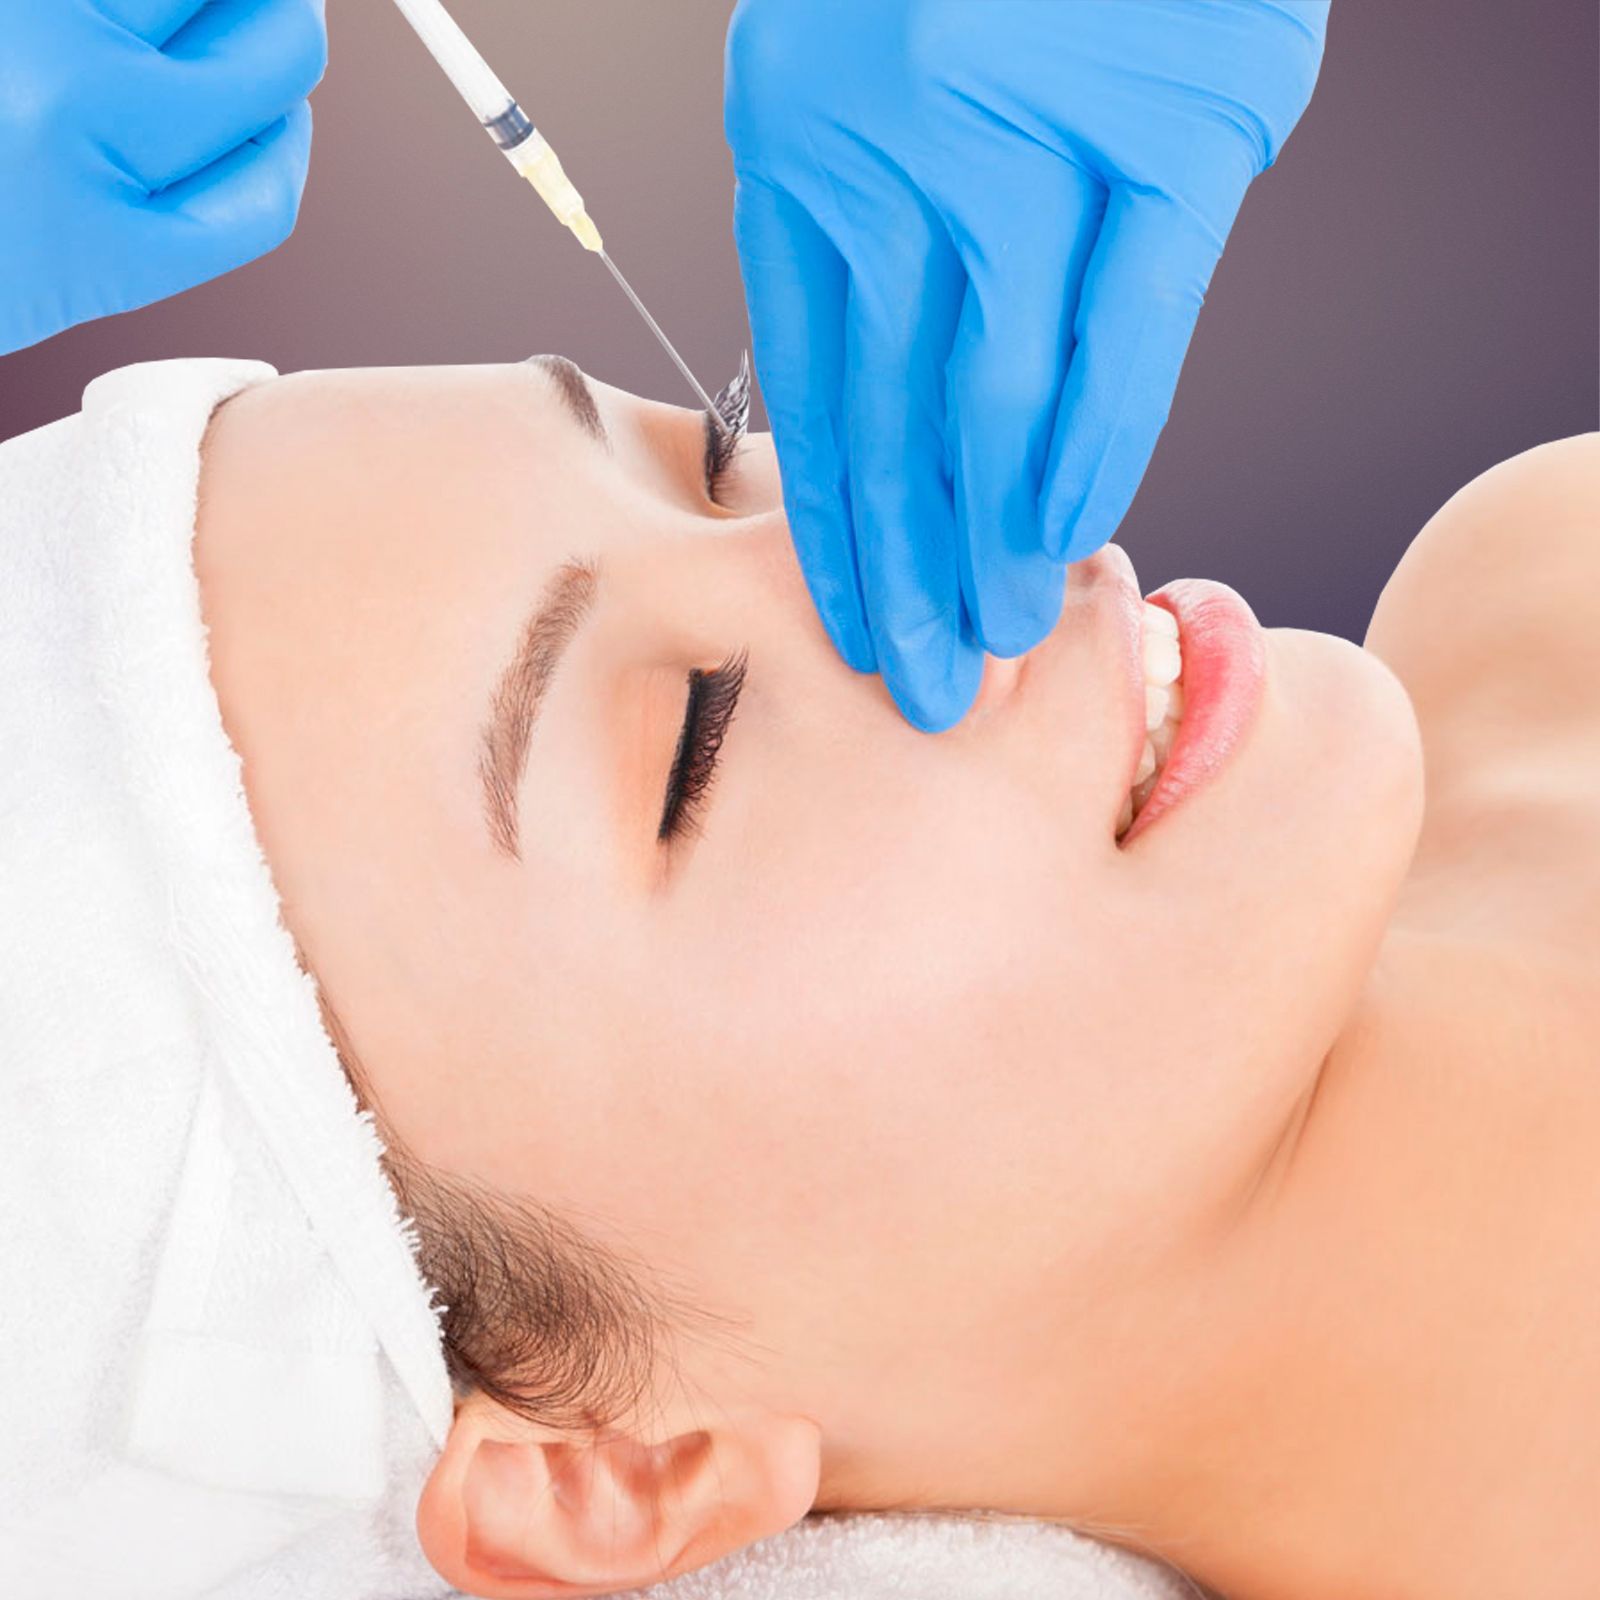 Female undergoing injectable nose job in Toronto